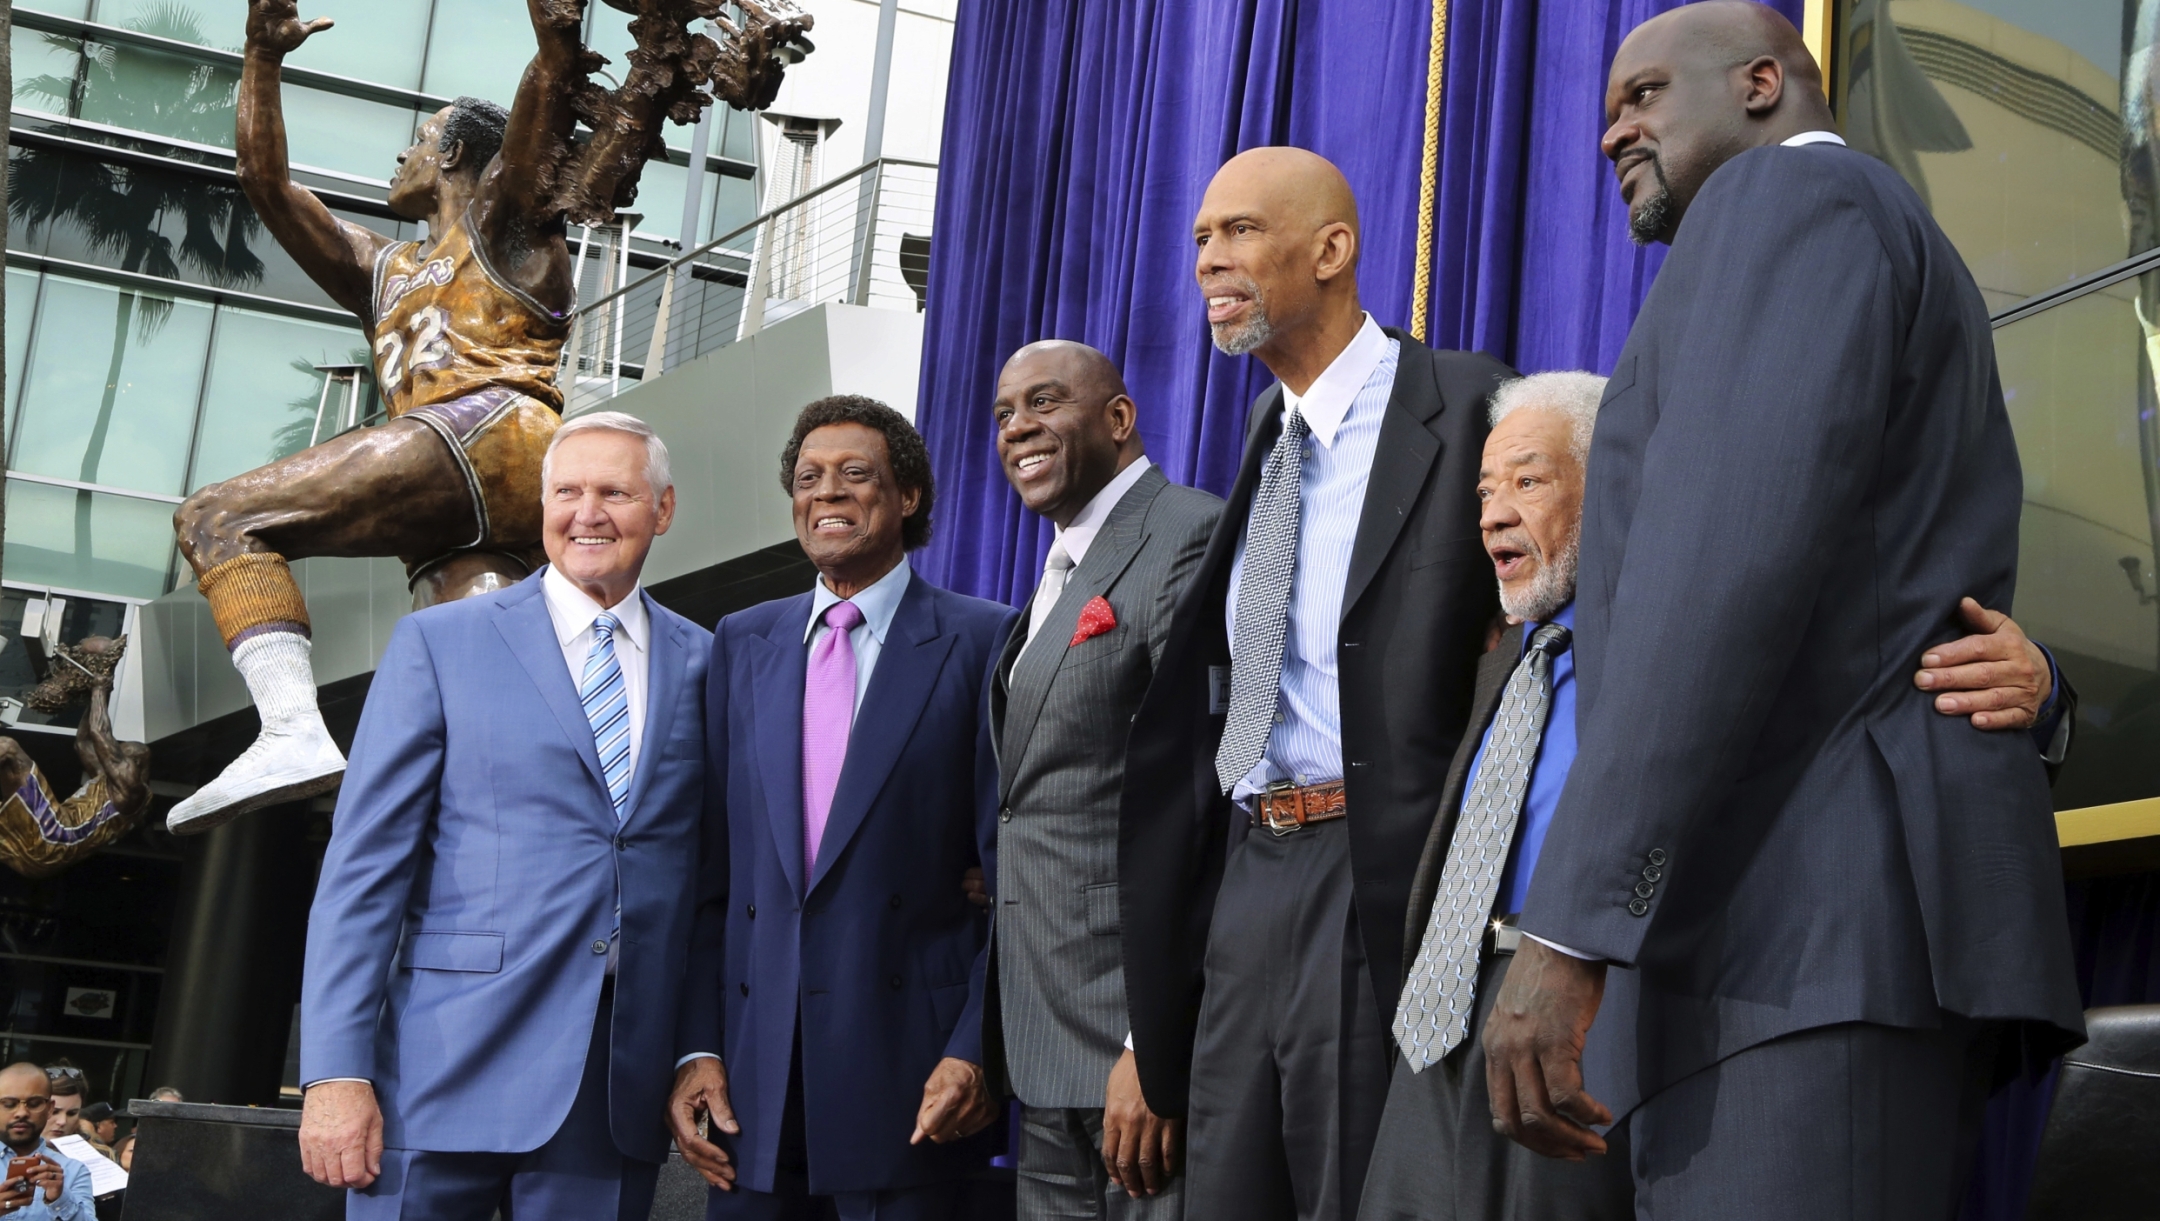 FILE - Lakers greats pose after the unveiling of a statue of Minneapolis and Los Angeles Lakers player Elgin Baylor, second from left, outside Staples Center in Los Angeles Friday, April 6, 2018. From left are Jerry West, Baylor, Earvin "Magic" Johnson, Kareem Abdul-Jabbar, musician Bill Withers, and Shaquille O'Neal. Jerry West, who was selected to the Basketball Hall of Fame three times in a storied career as a player and executive and whose silhouette is considered to be the basis of the NBA logo, died Wednesday morning, the Los Angeles Clippers announced. He was 86.(AP Photo/Reed Saxon, File)